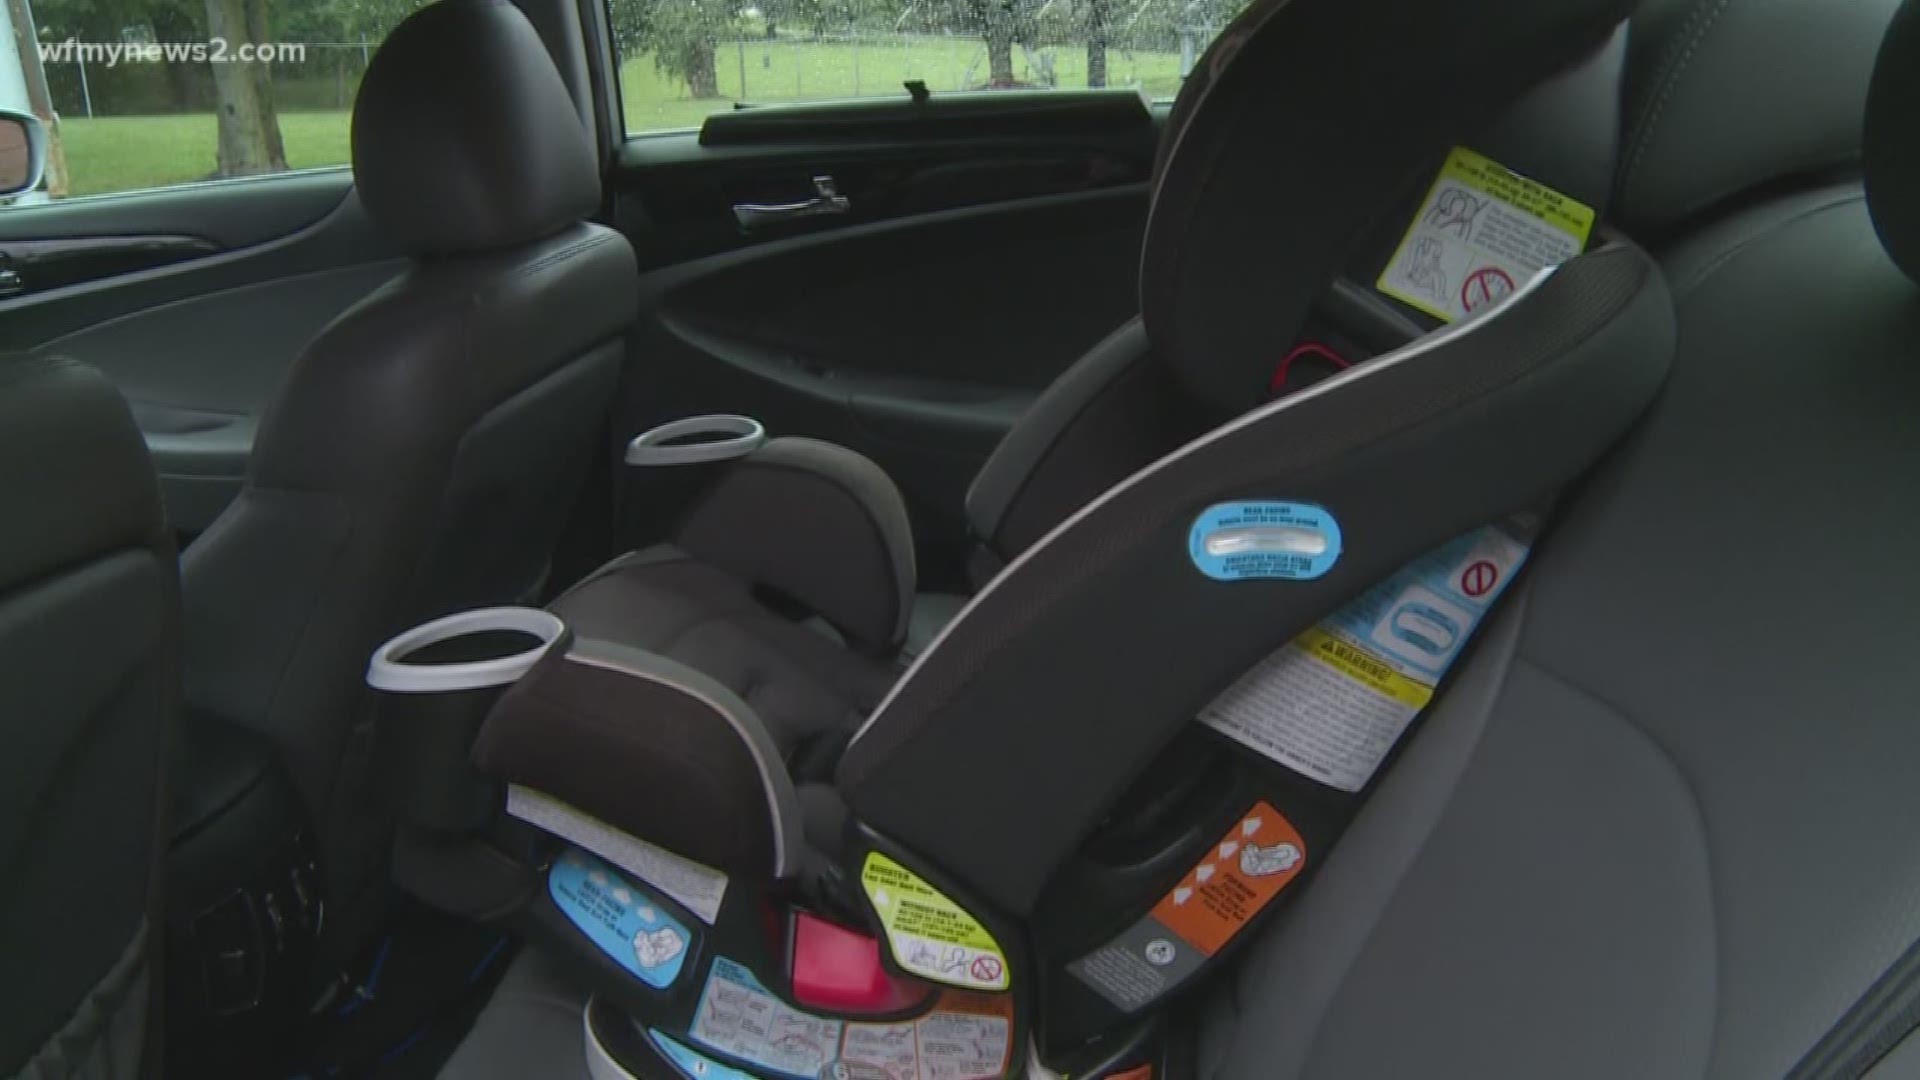 Never Buy A Used Car Seat. They expire and often you don't know the crash history.